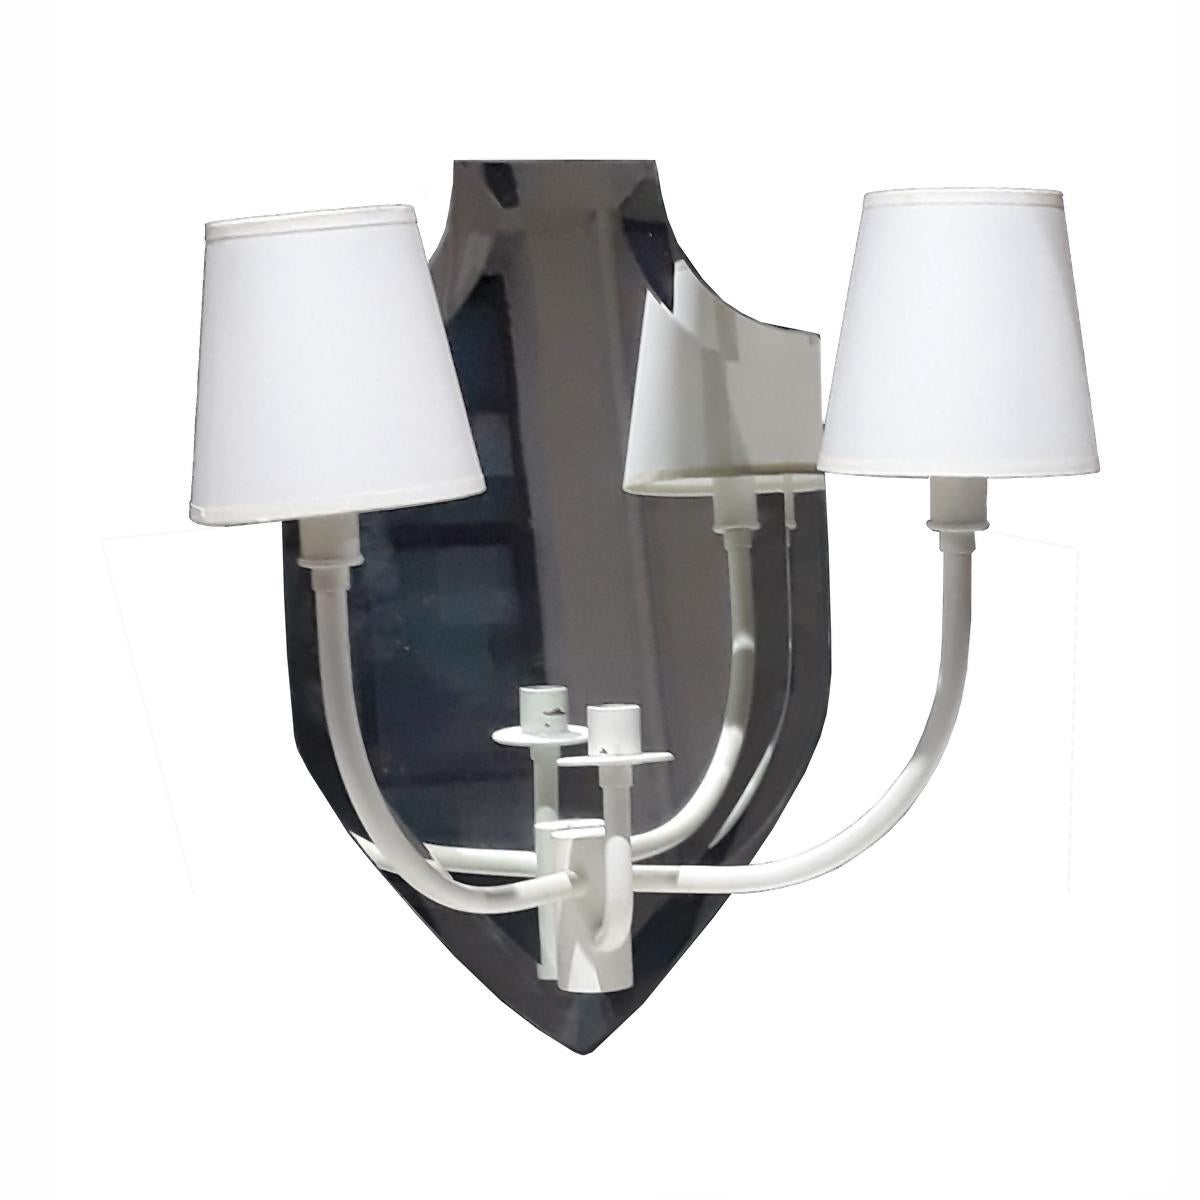 Late 20th Century Mirrored Two-Arm Wall Light Sconce For Sale